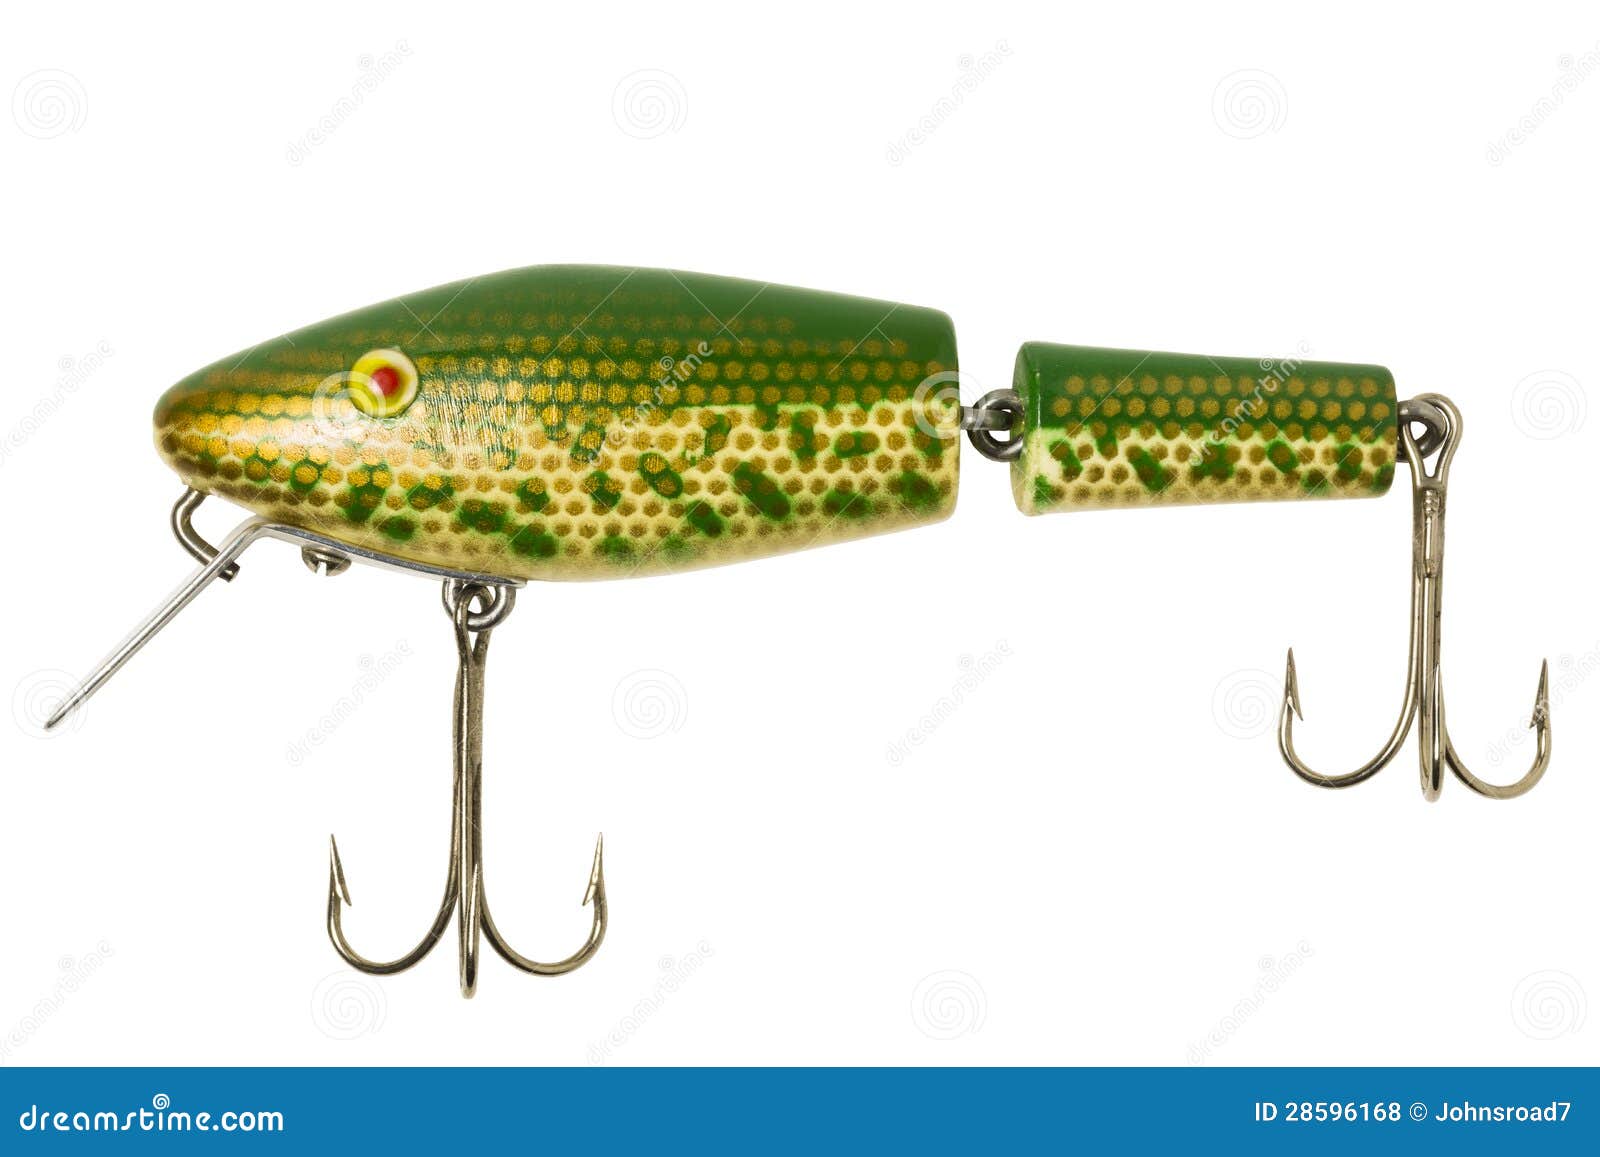 448 Antique Fishing Tackle Stock Photos - Free & Royalty-Free